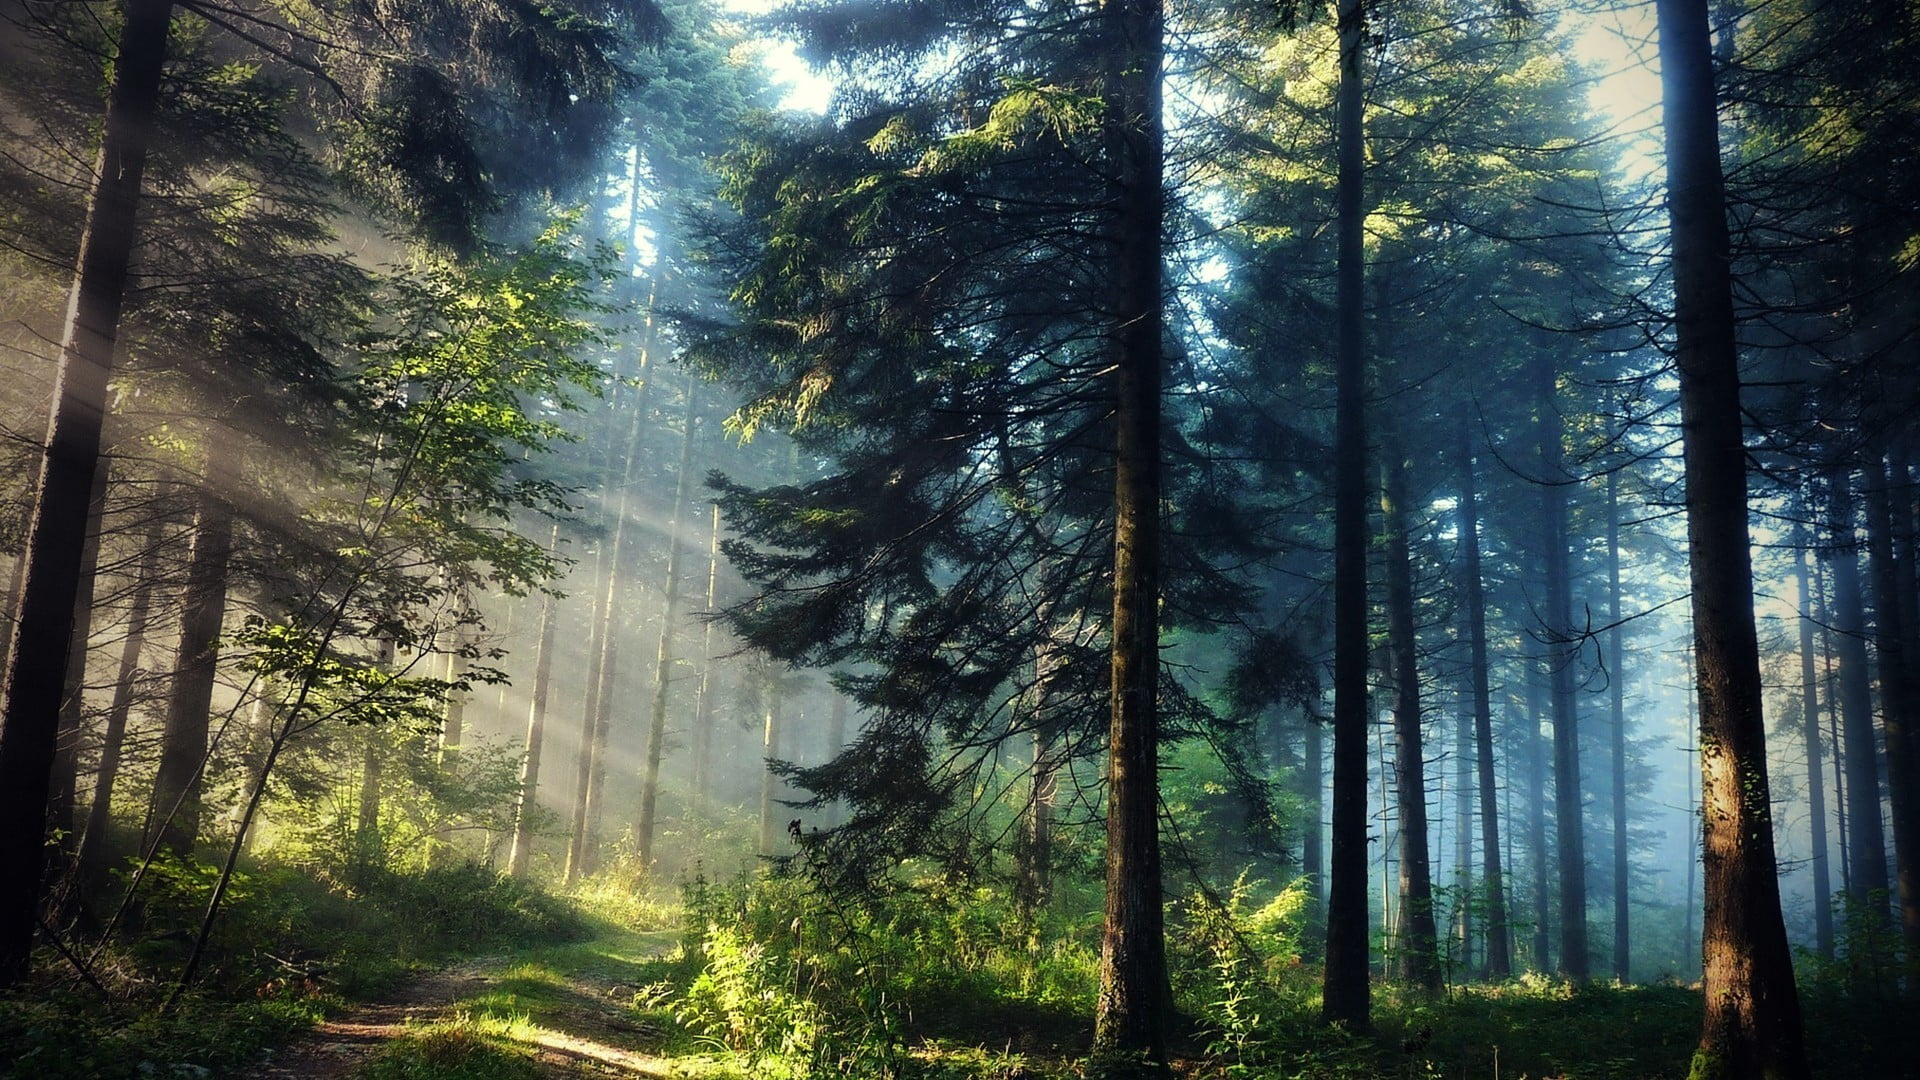 Green forest wallpaper, landscape photography of a forest, trees, sun rays